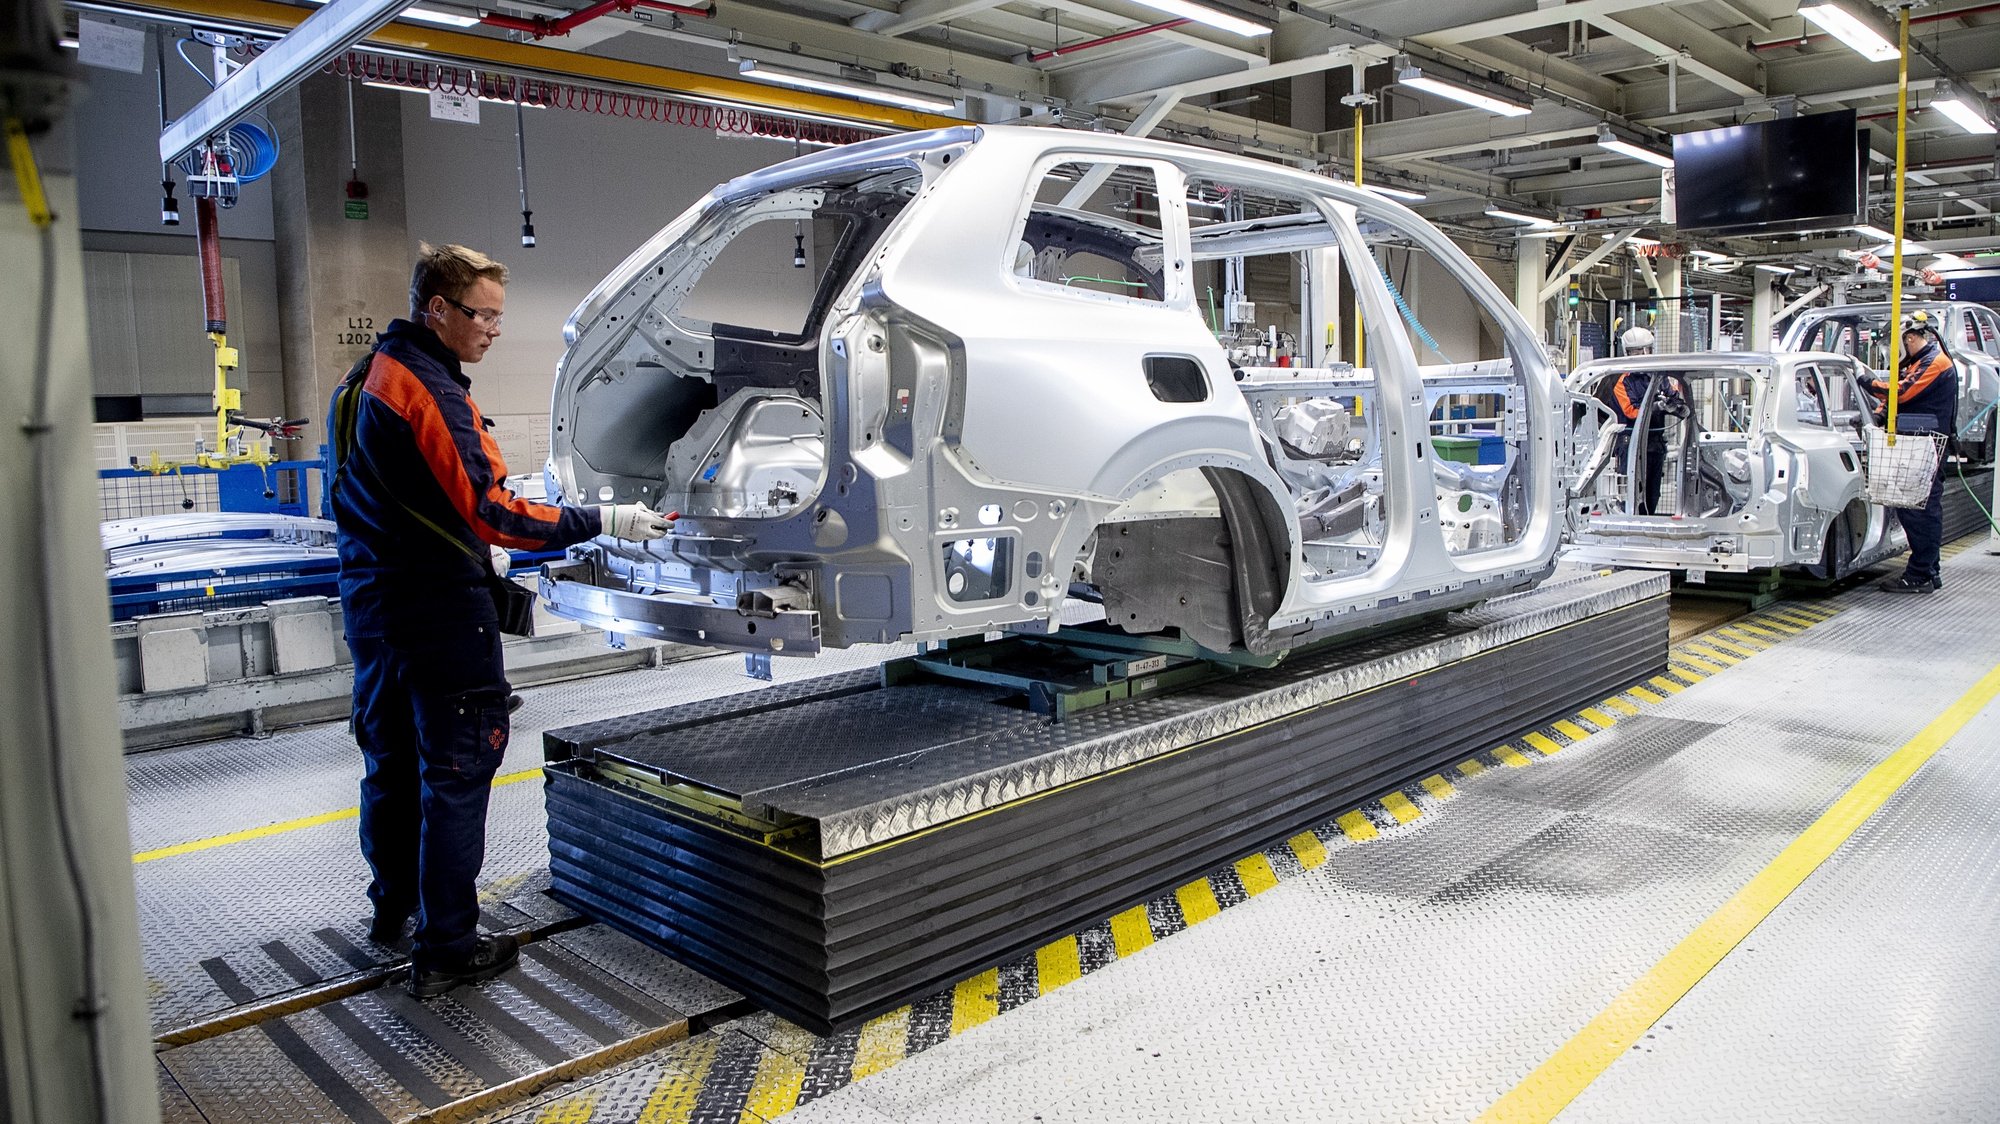 epa08369235 An employee works on a car in the Volvo Cars factory in Torslanda, Gothenburg, Sweden, 17 April 2020. Volvo Cars has started up the production at the factory in Torslanda again after a stand still since March 26 due to coronavirus, Covid-19 situation.  EPA/Adam Ihse SWEDEN OUT